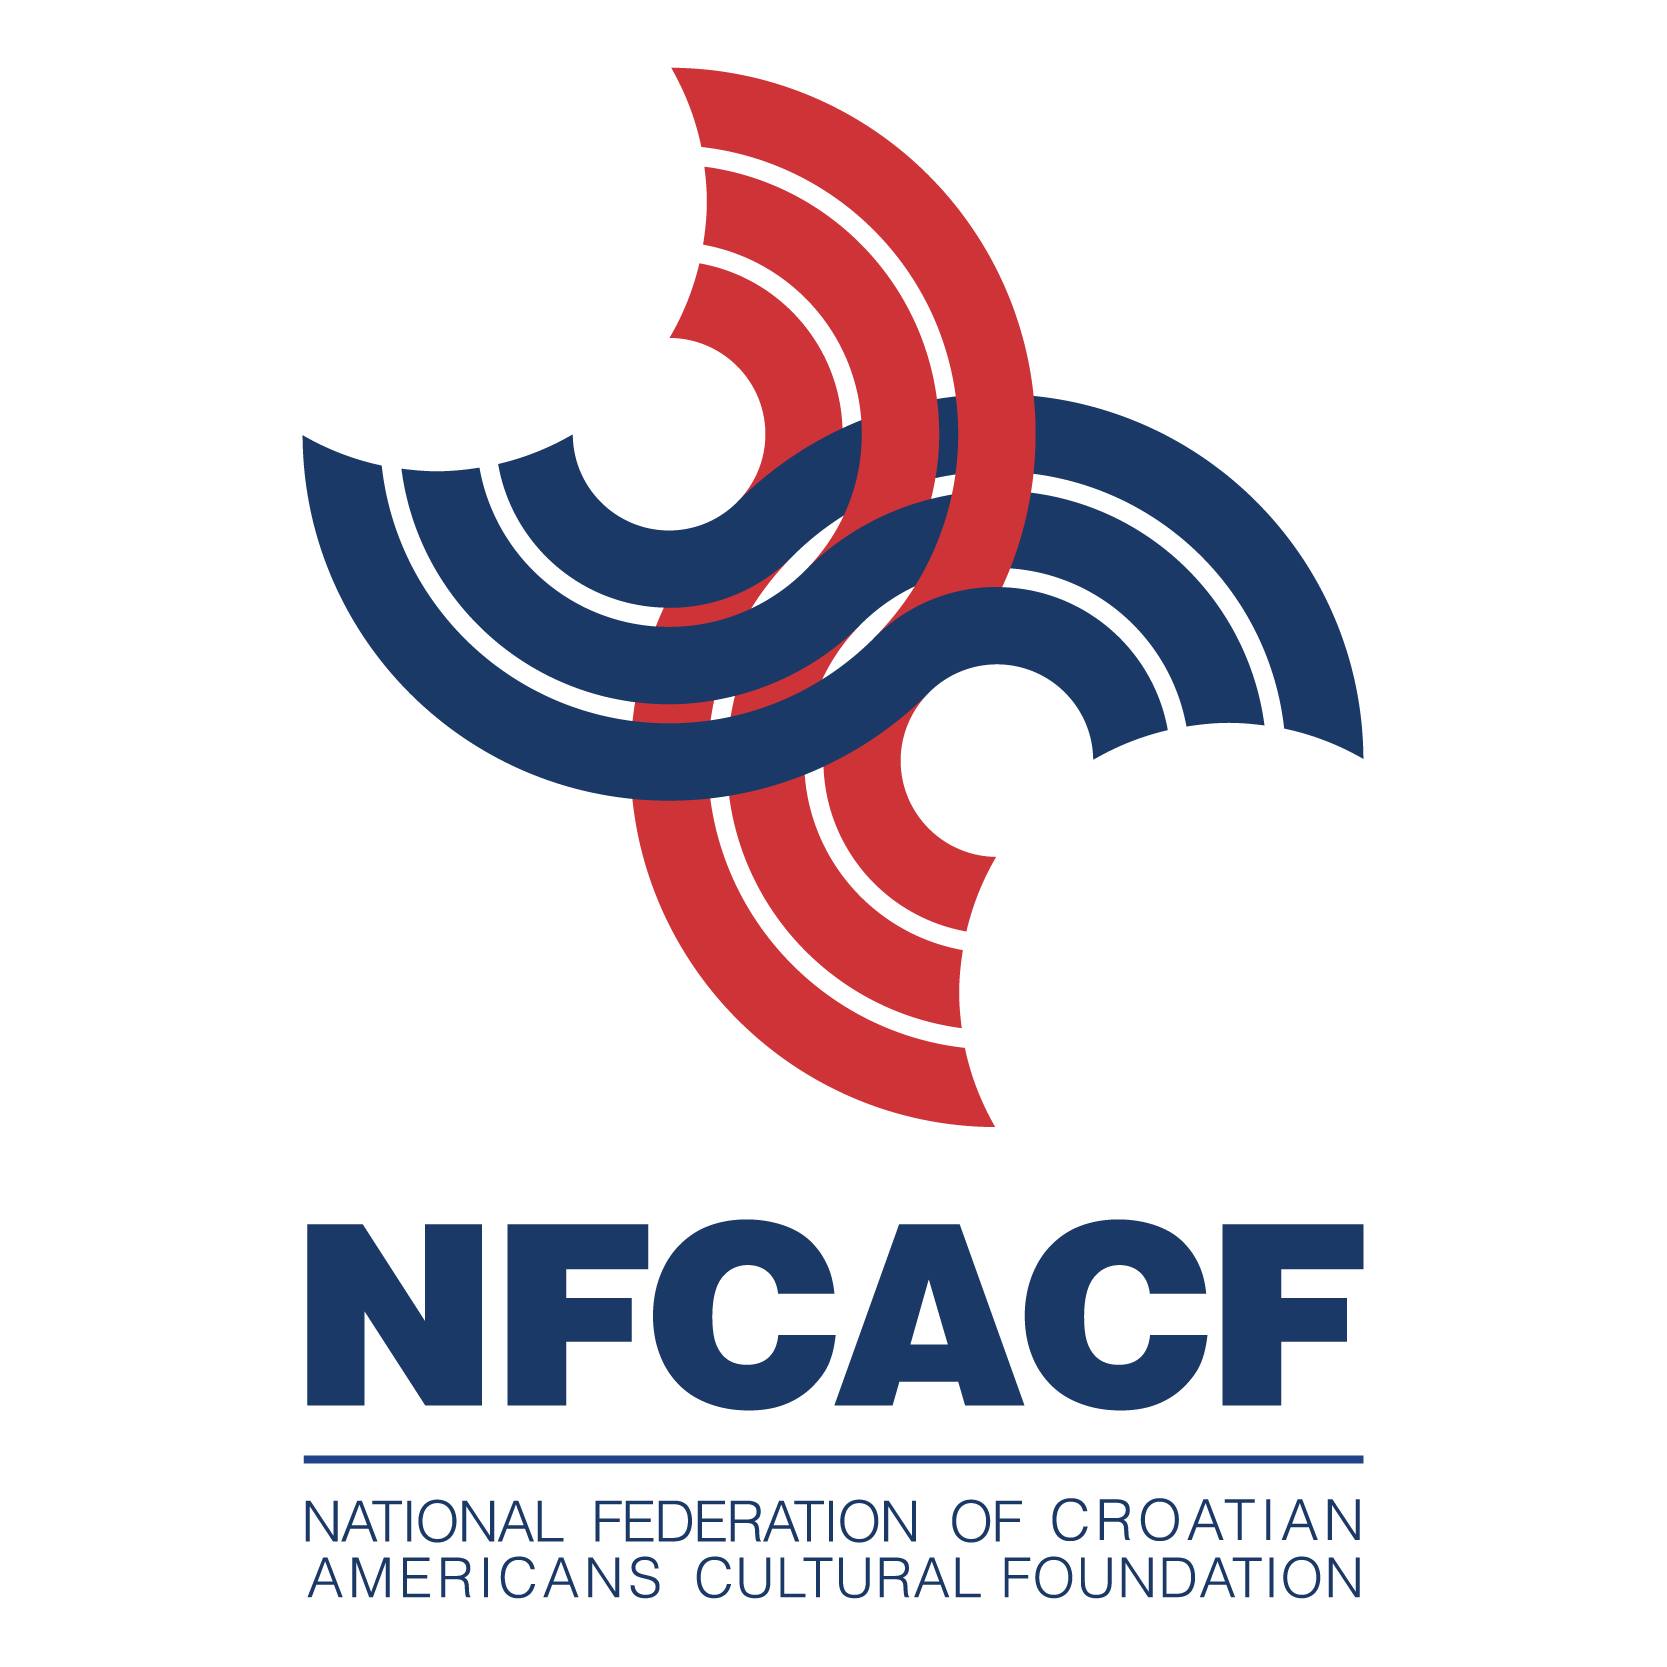 Croatian Organization in District of Columbia - National Federation of Croatian Americans Cultural Foundation